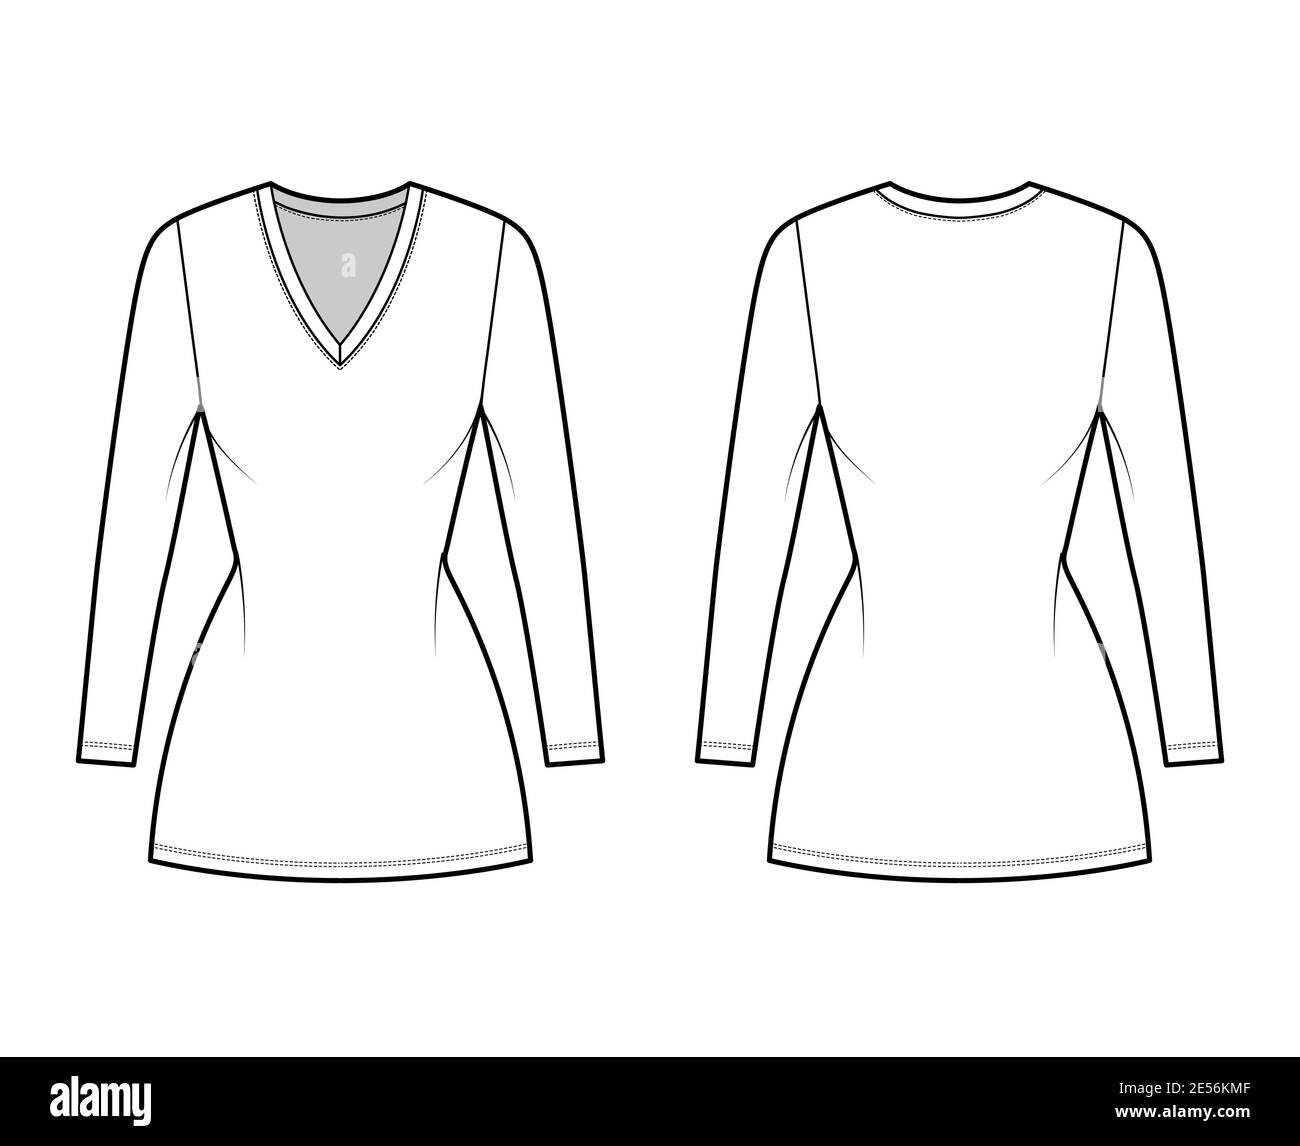 T-shirt dress technical fashion illustration with V-neck, long sleeves, mini length, fitted body, Pencil fullness. Flat apparel template front, back, white color. Women, men, unisex CAD mockup Stock Vector